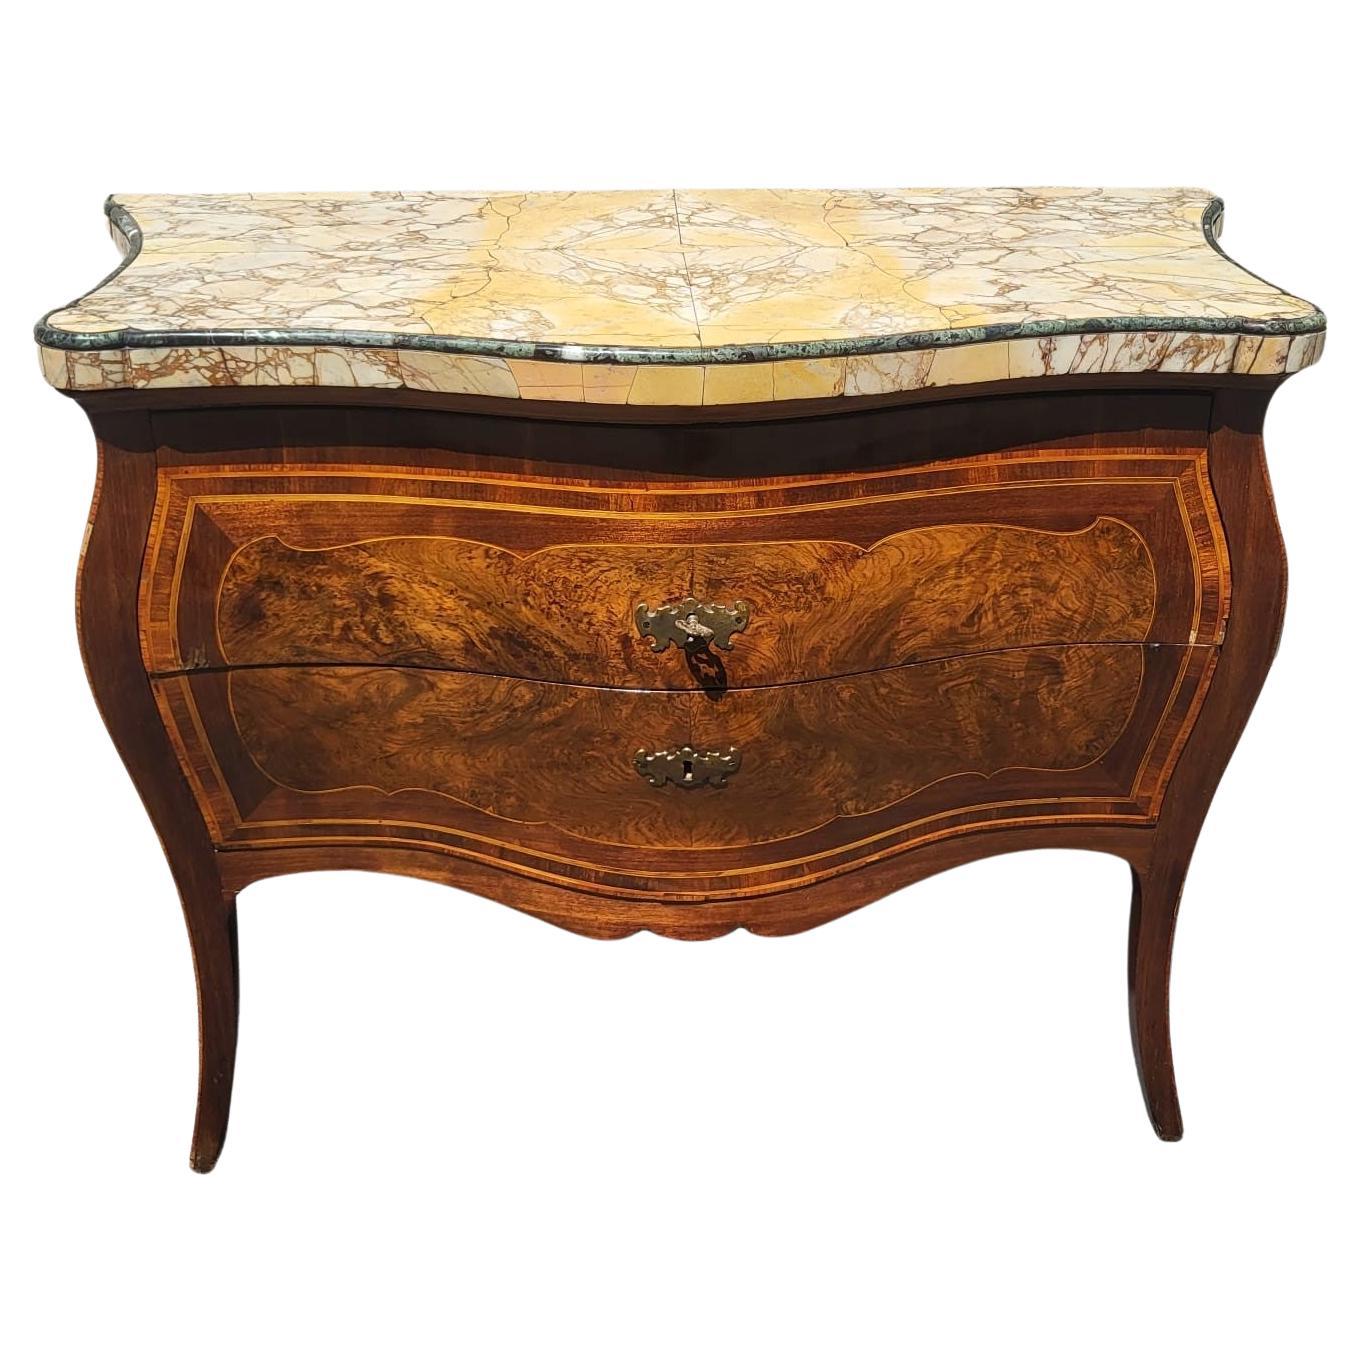 Beautiful Roman Marquetry Commode, 18th Century Period For Sale